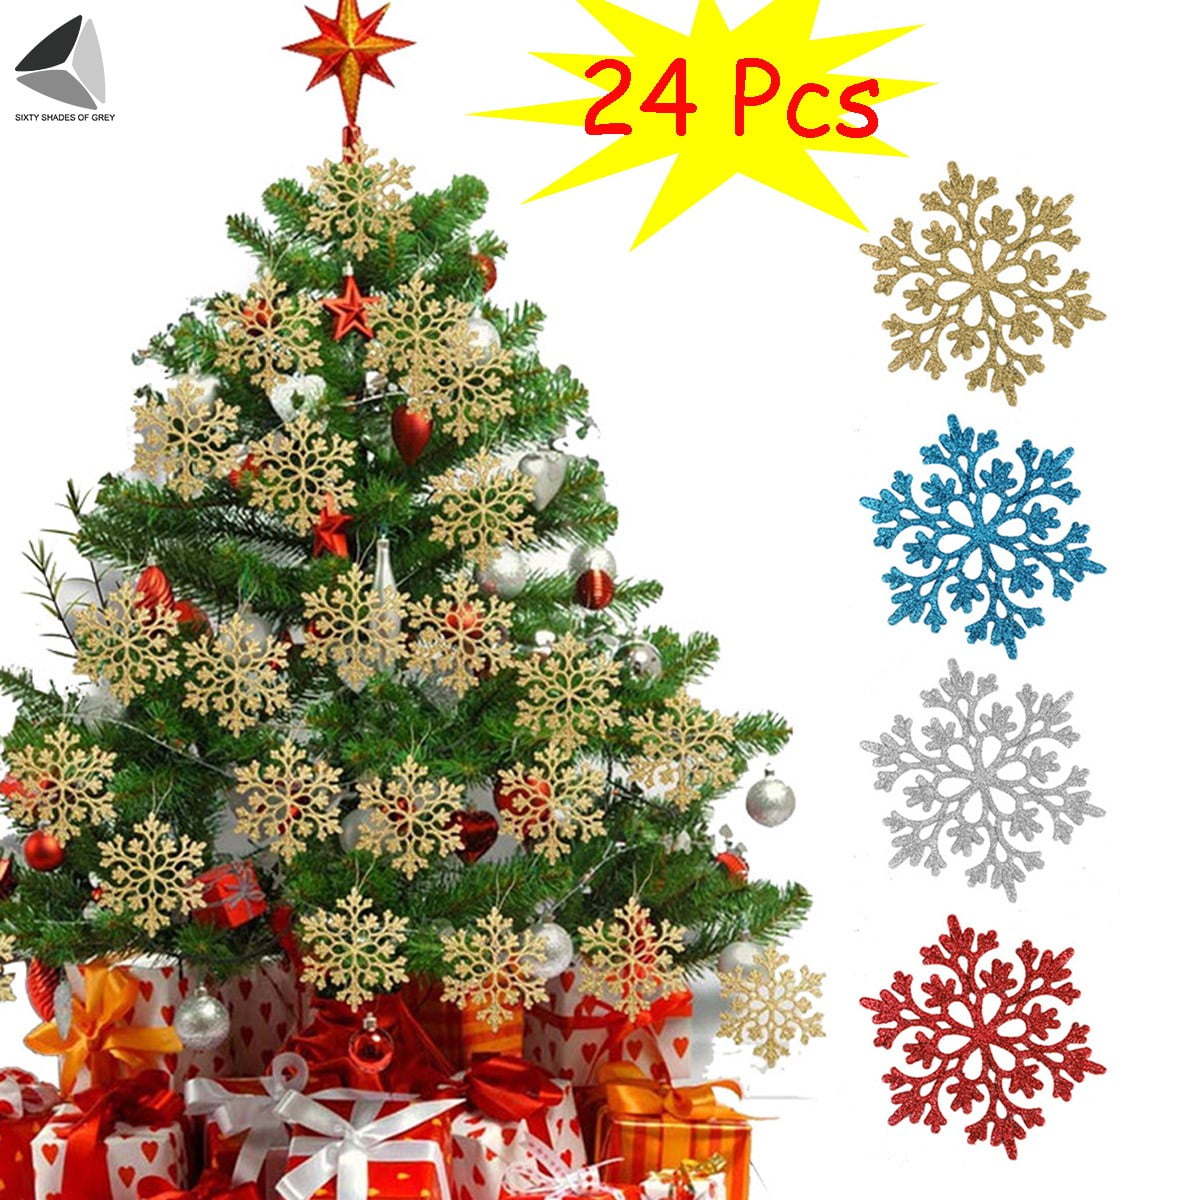 Sixtyshades 72 Pcs Christmas Hanging Snowflake Decorations Winter White  Glitter Snowflake Ornaments for Window Xmas Tree Ceiling (5.9 inch)